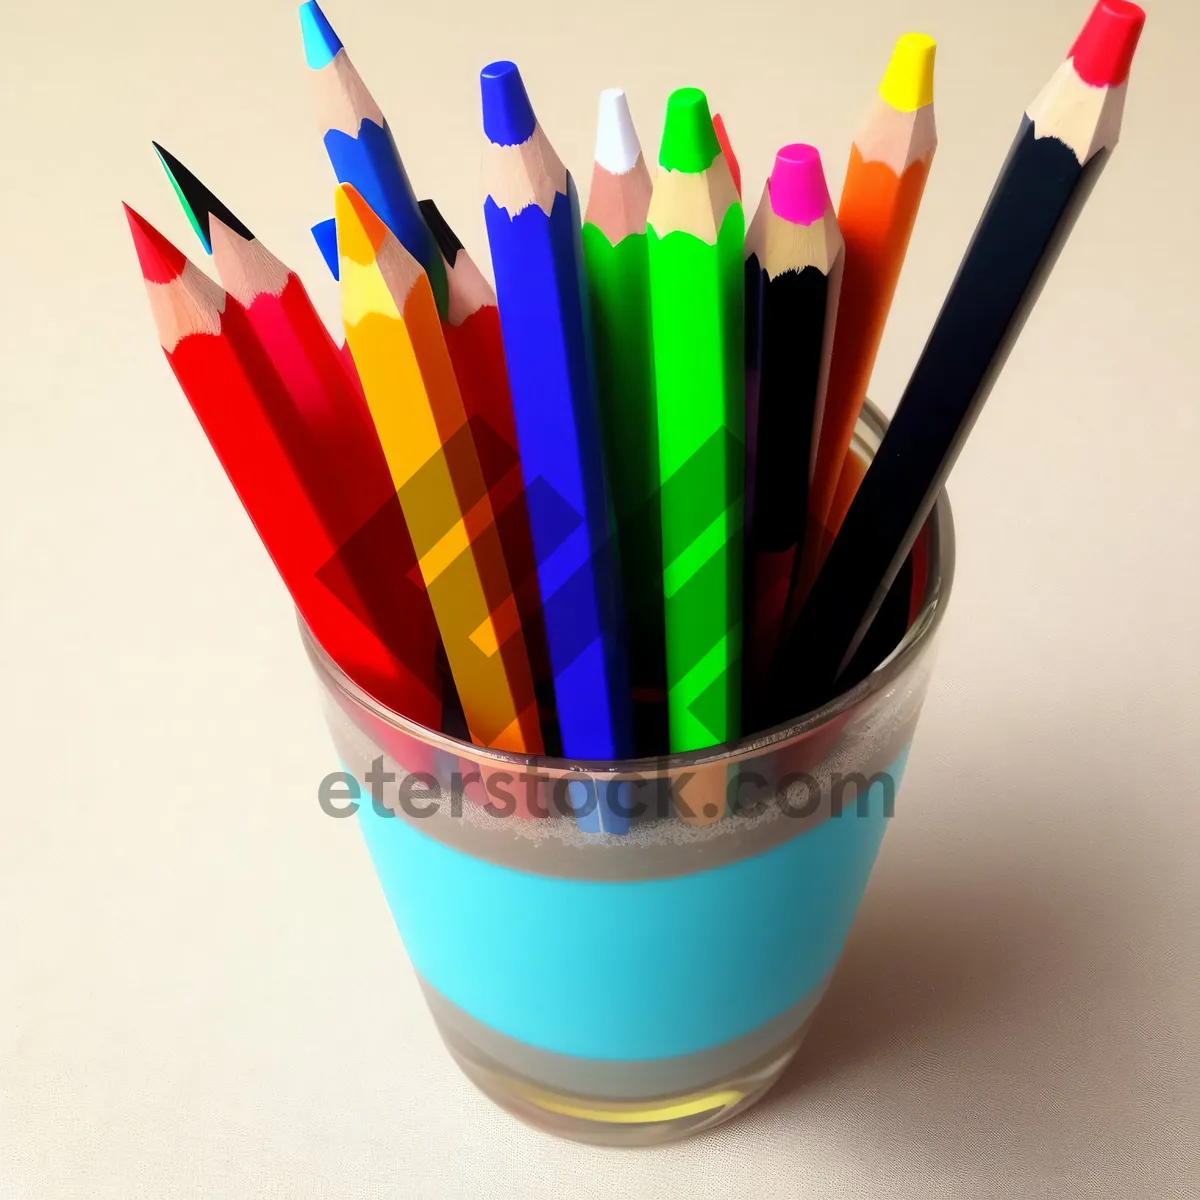 Picture of Vibrant Rainbow Pencil Set for Artistic Sketching